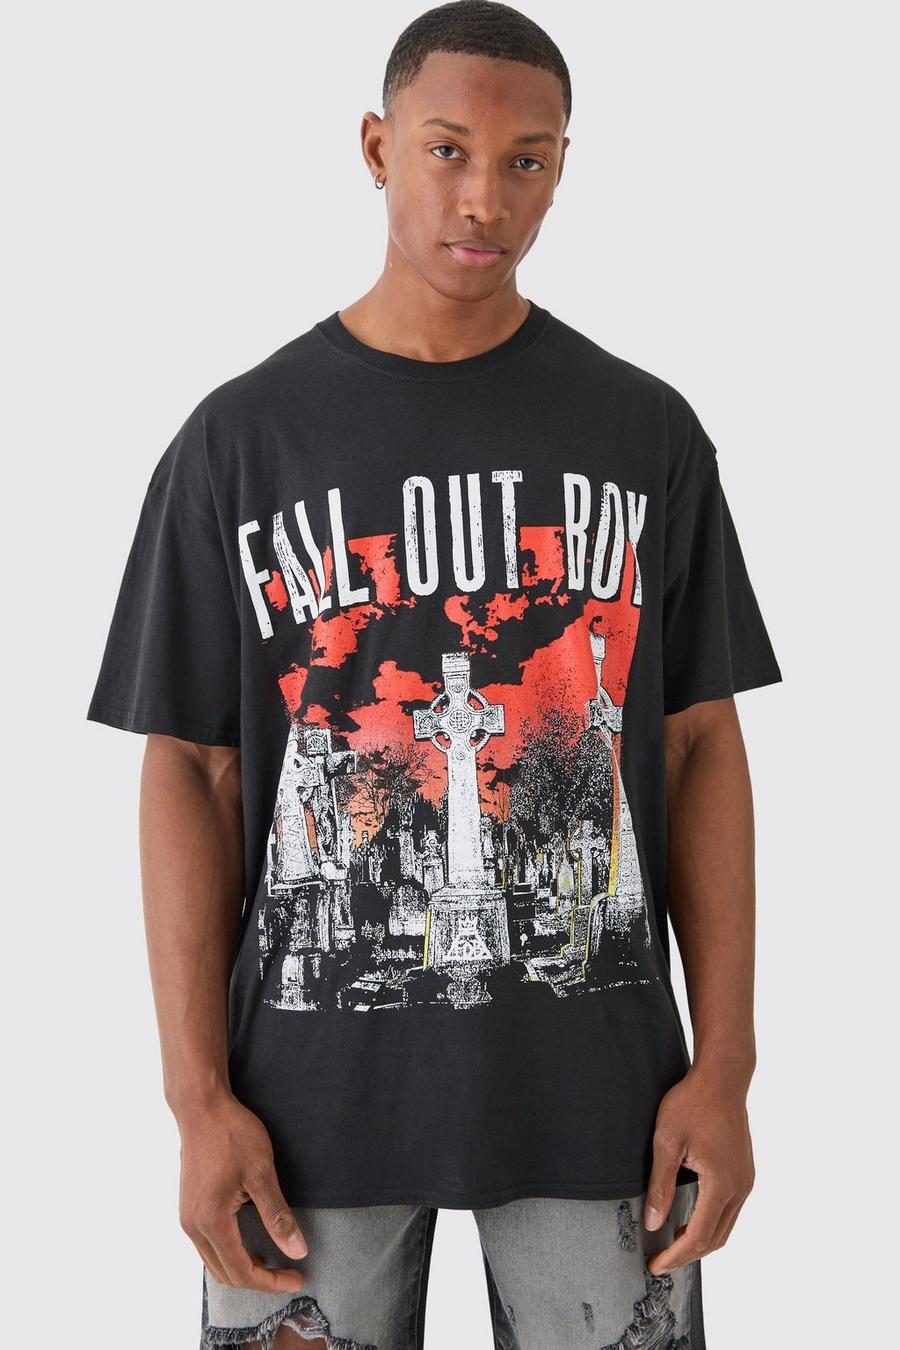 Kastiges Oversize T-Shirt mit Fall Out Boy Band Print, Black